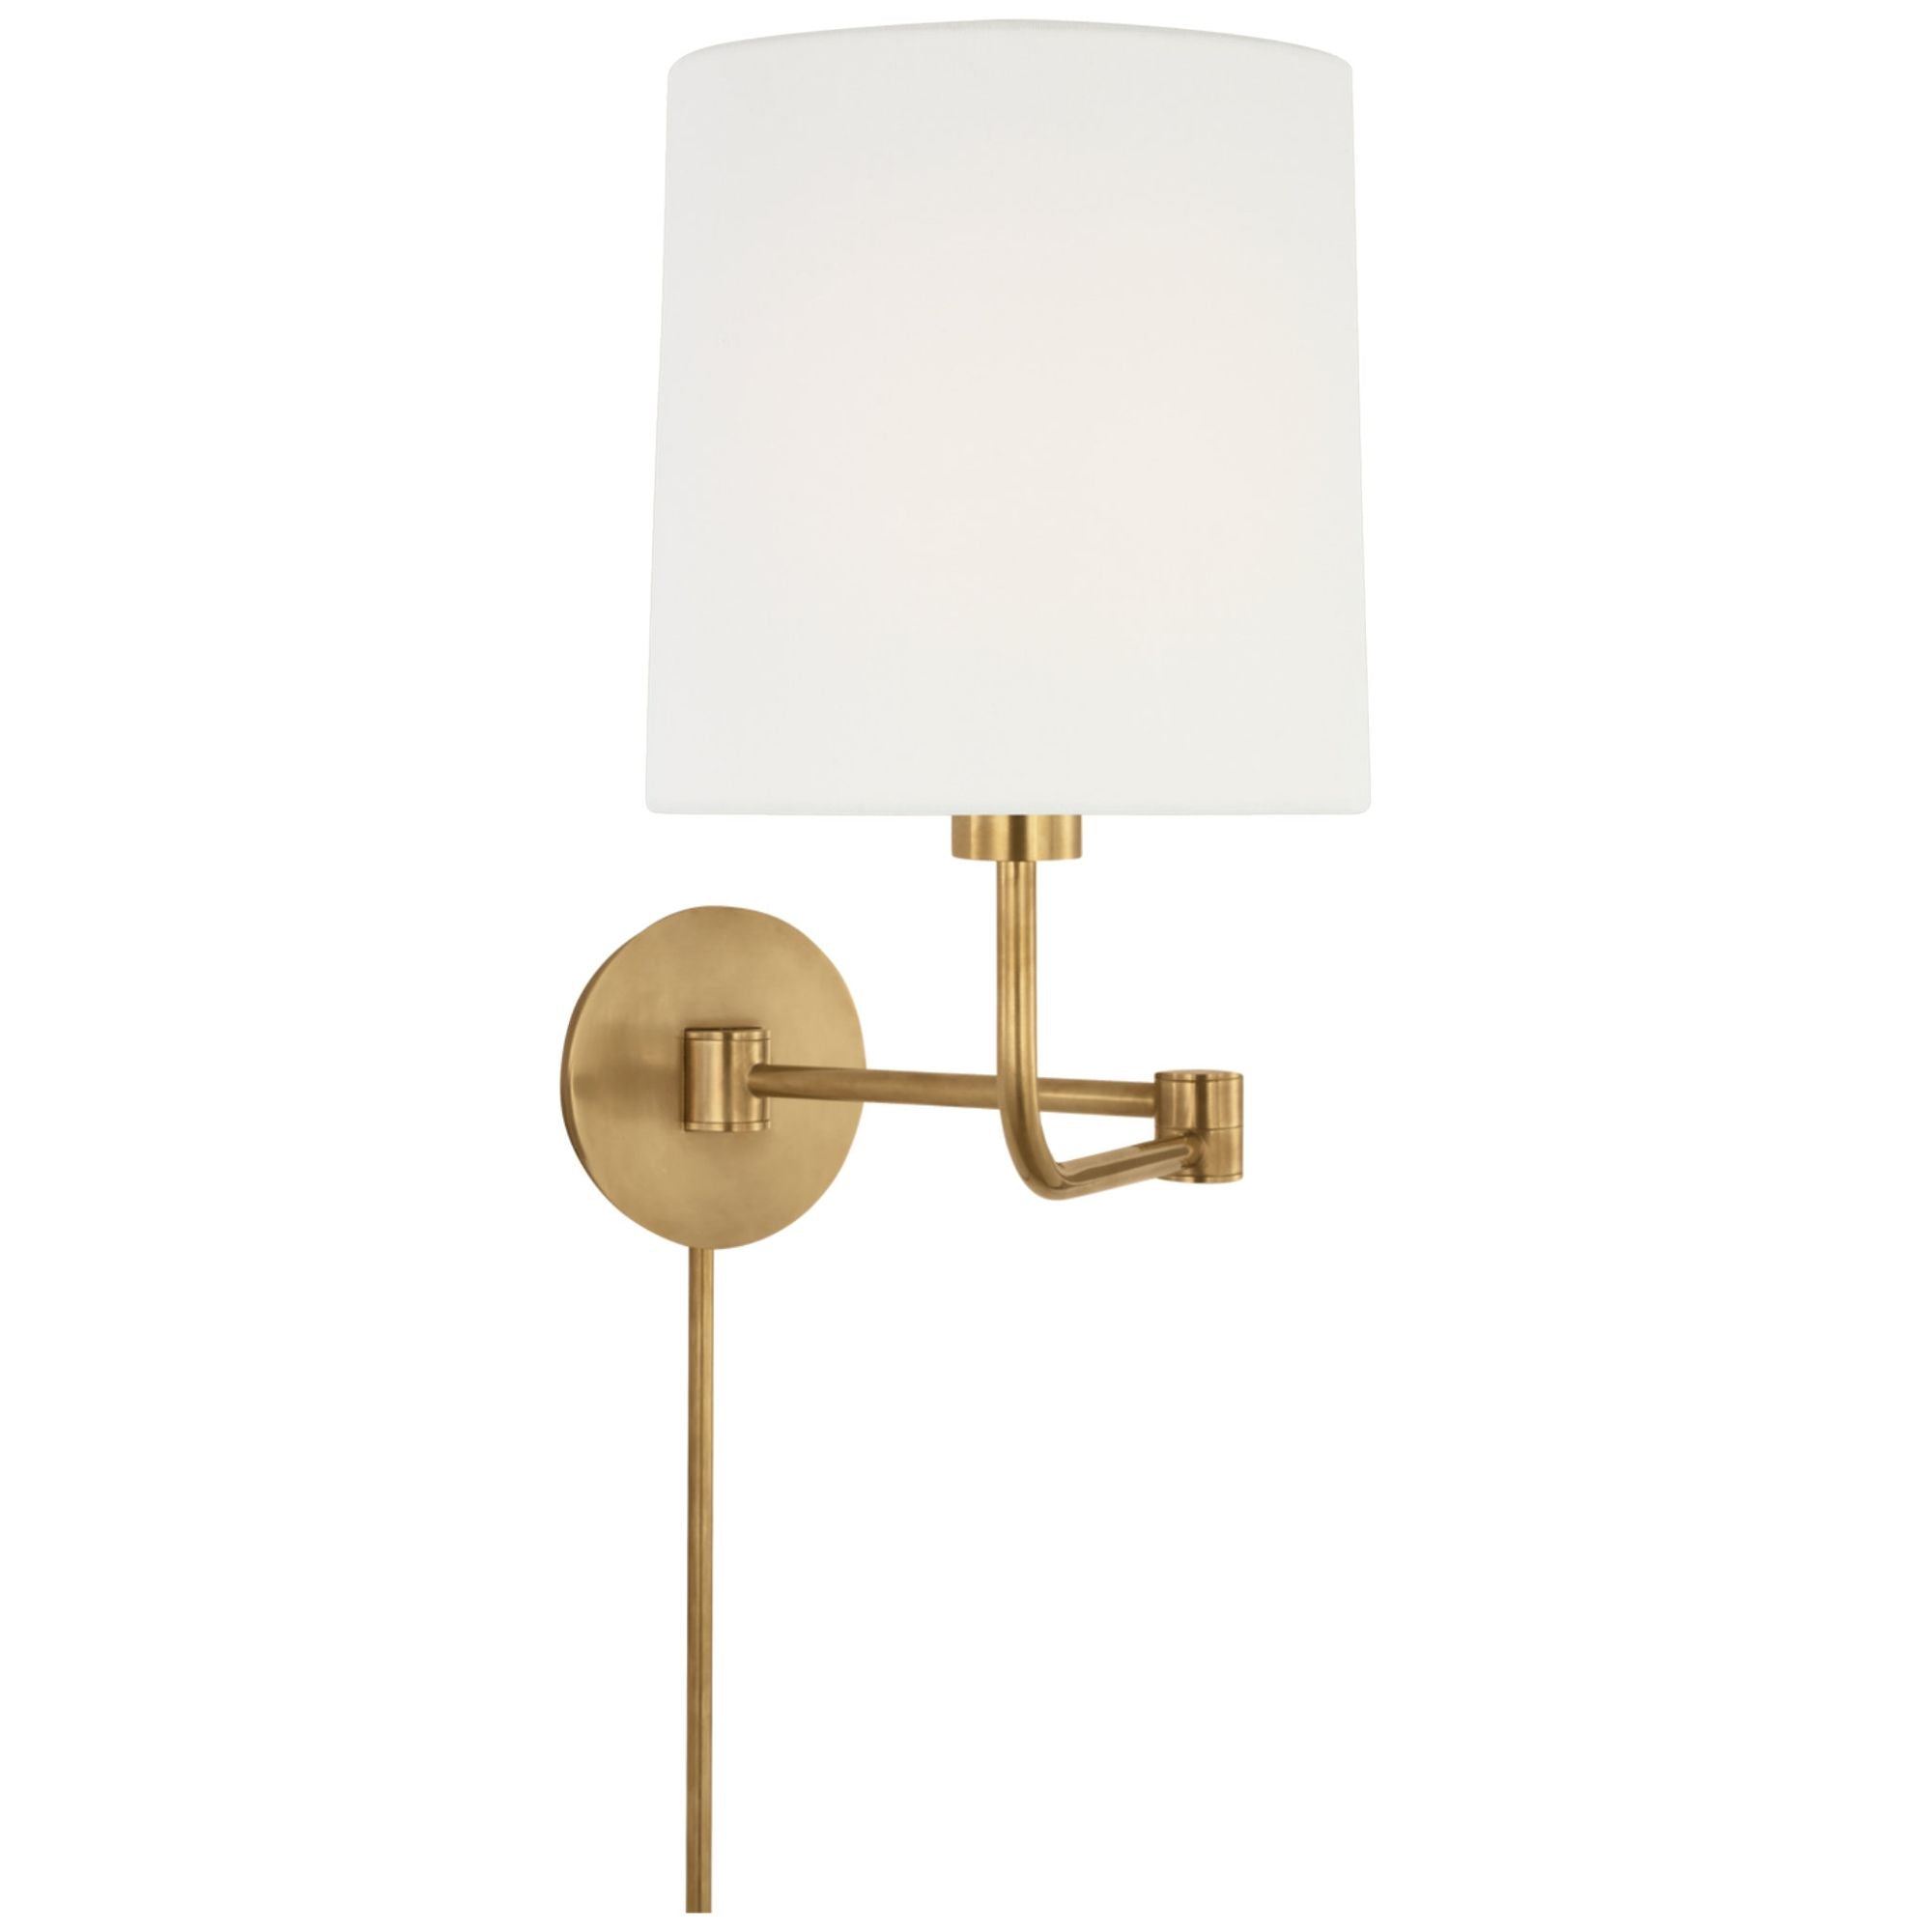 Barbara Barry Go Lightly Swing Arm Wall Light in Soft Brass with Linen Shade